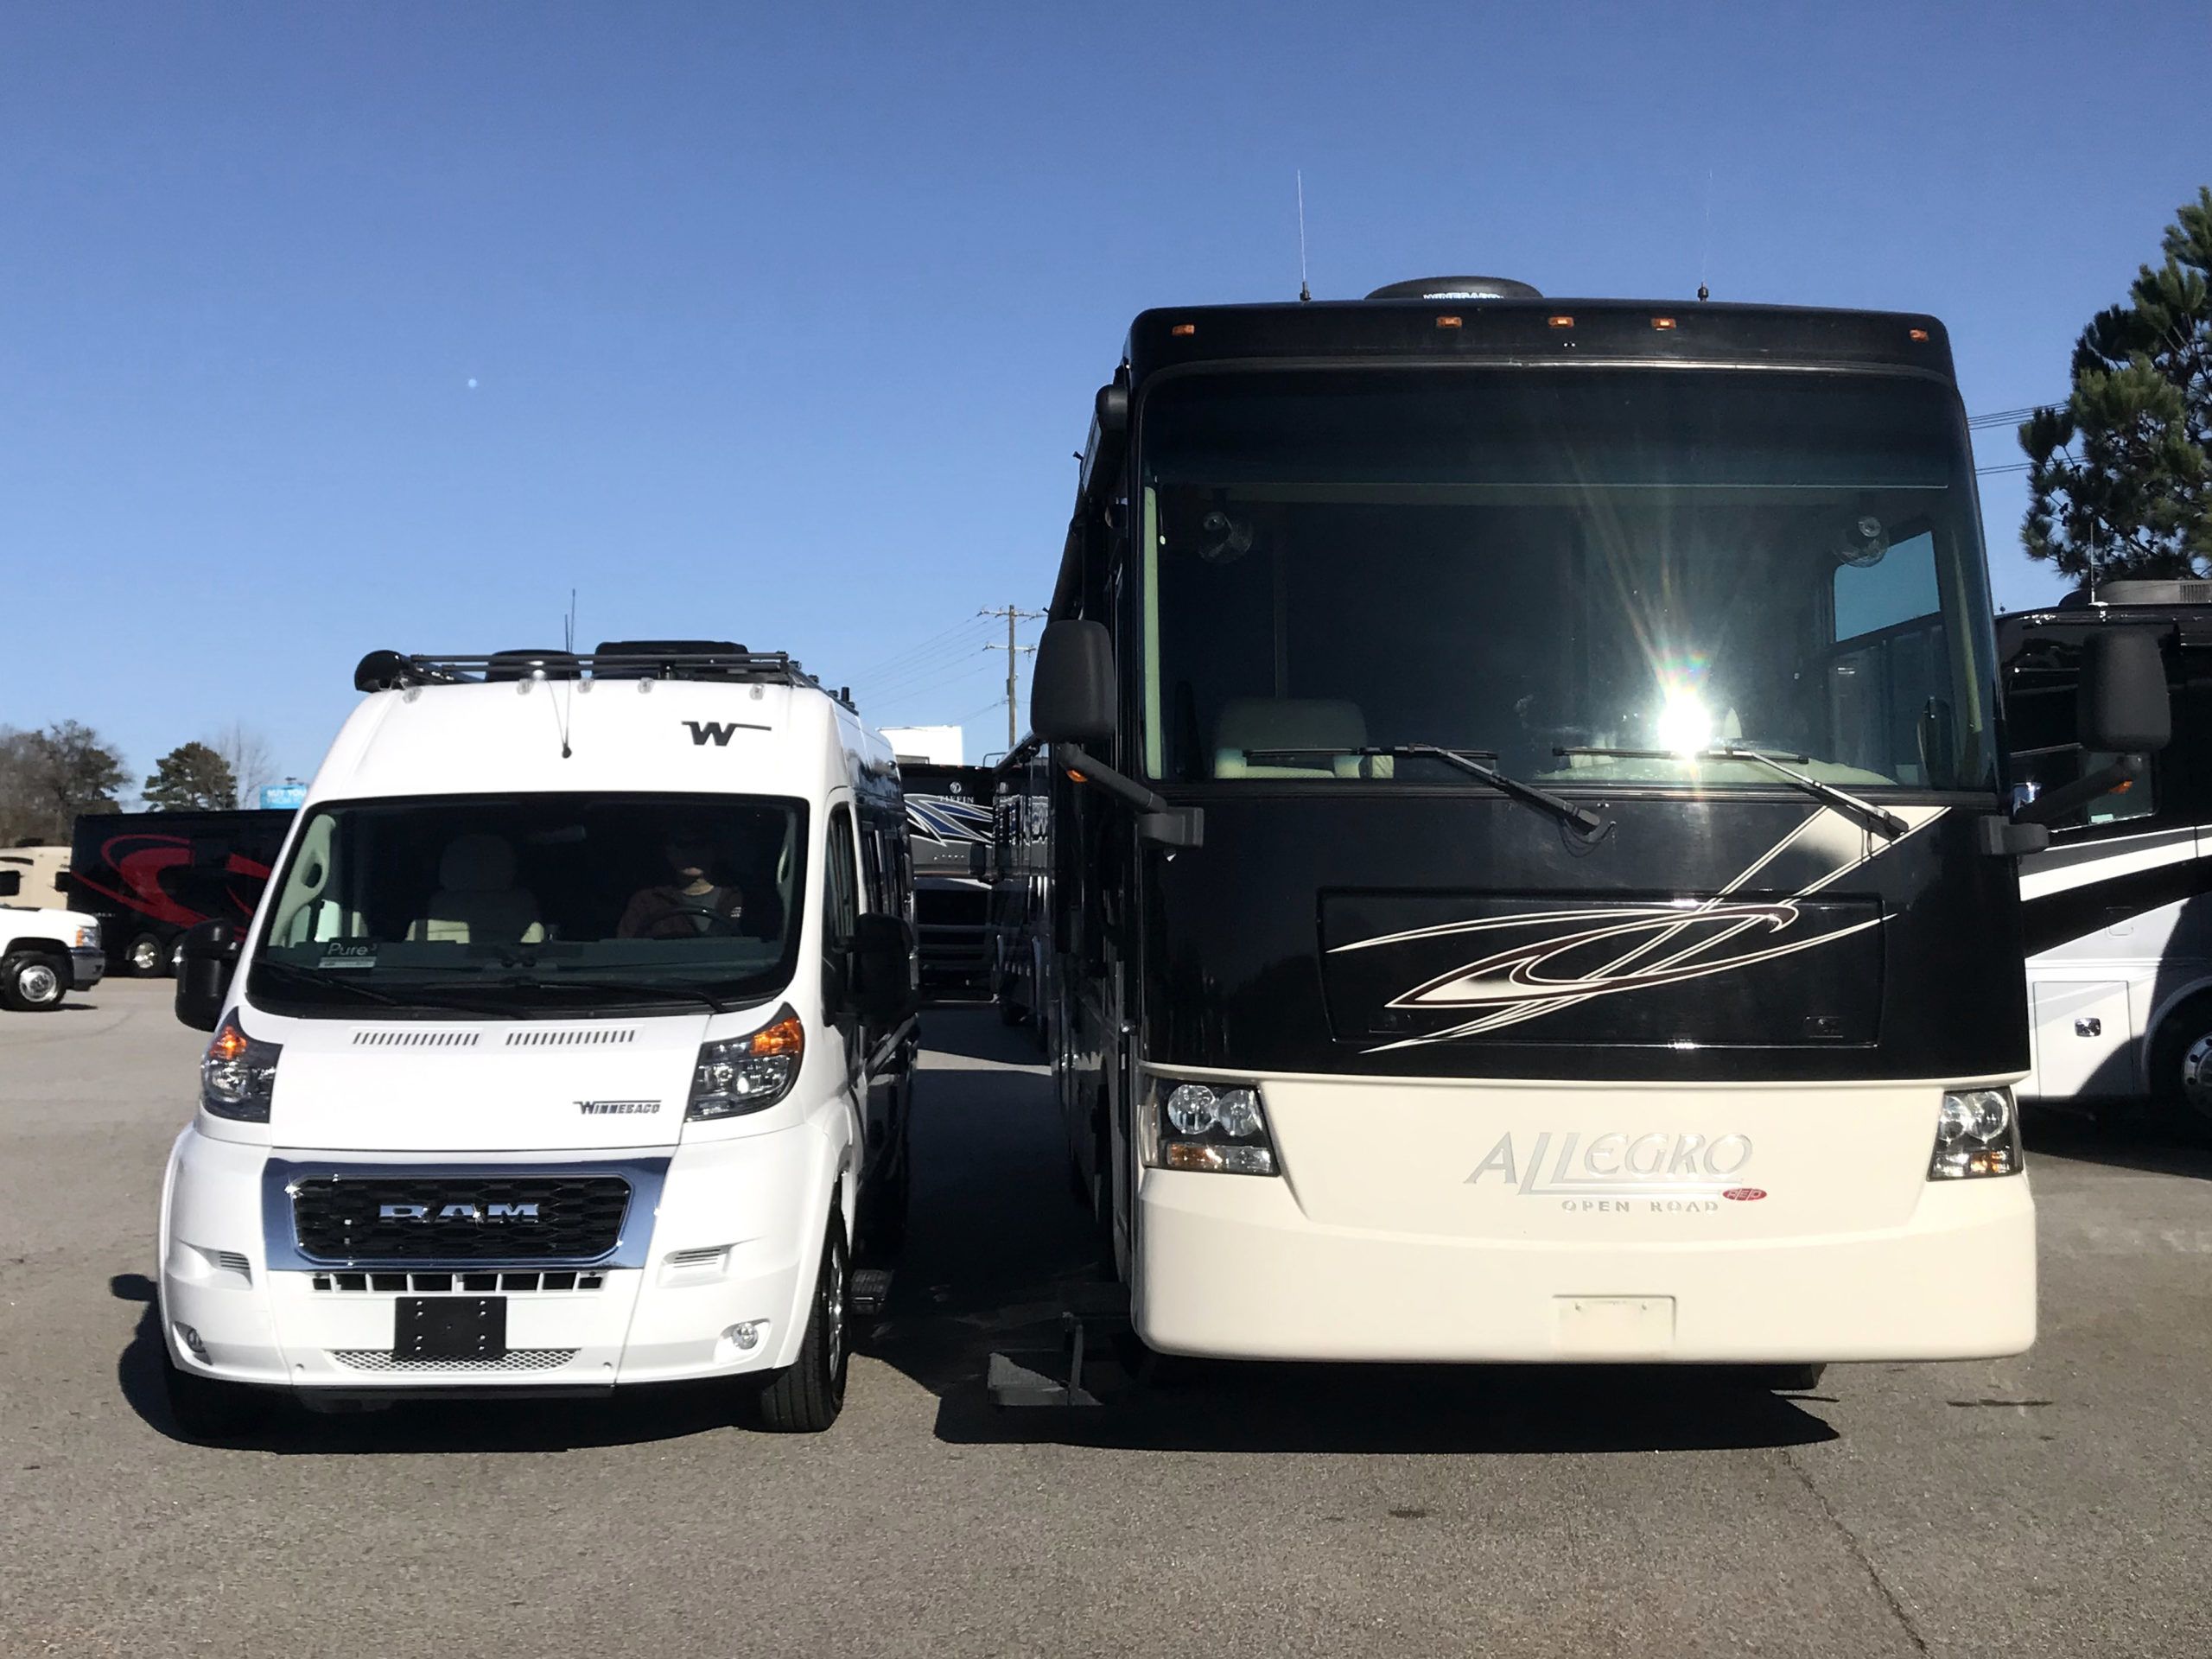 Downsizing RVs: From Class A to Van Life 85